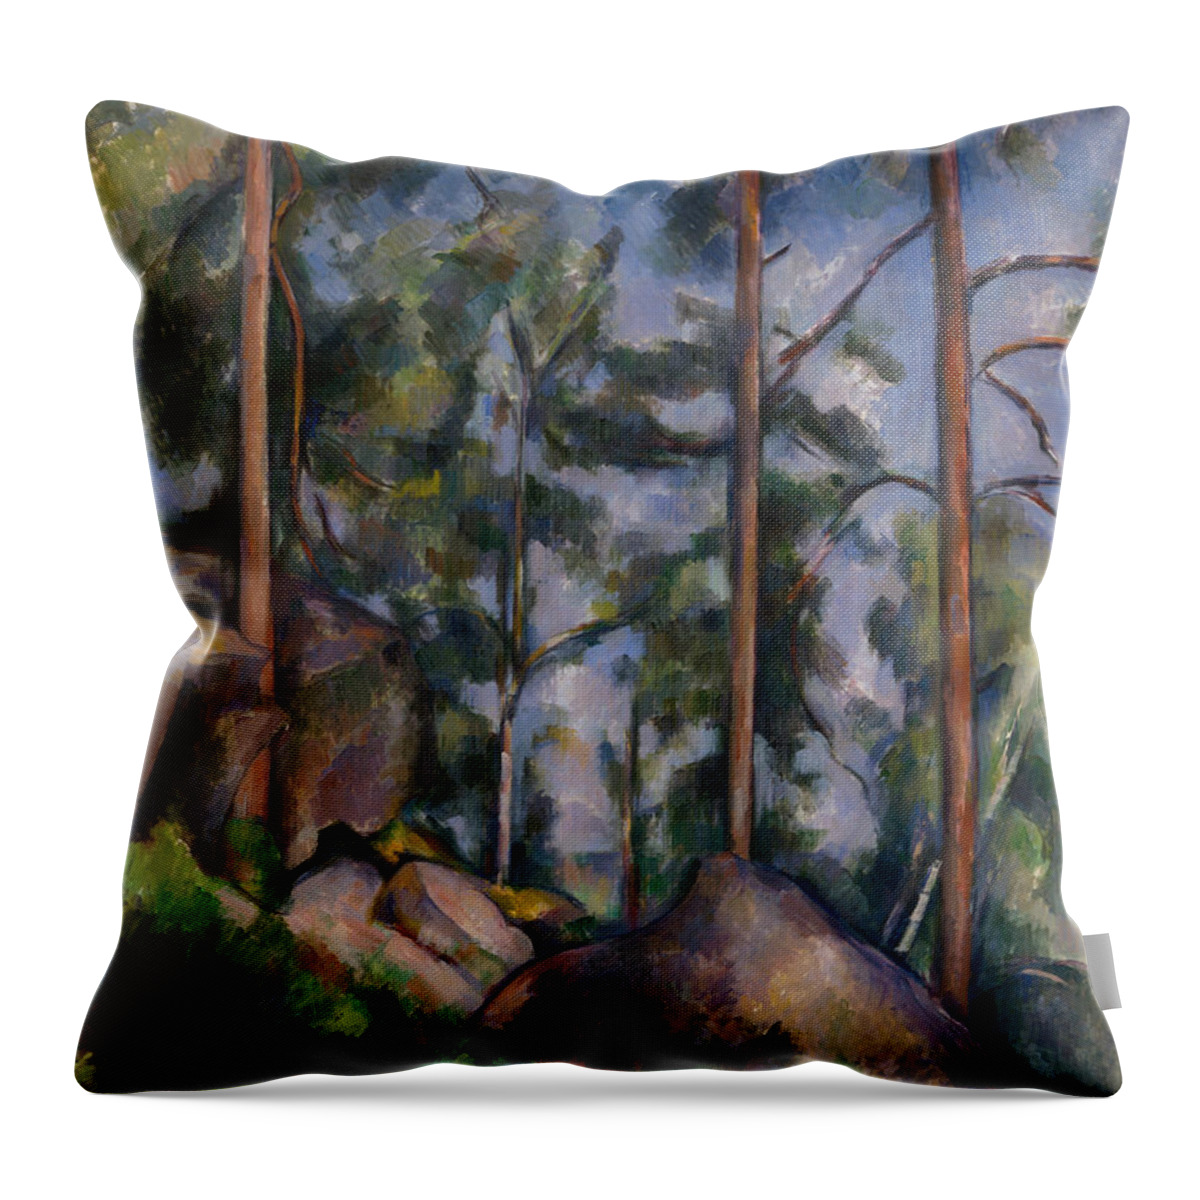 Paul Cezanne Throw Pillow featuring the painting Pines and Rocks, from 1897 by Paul Cezanne